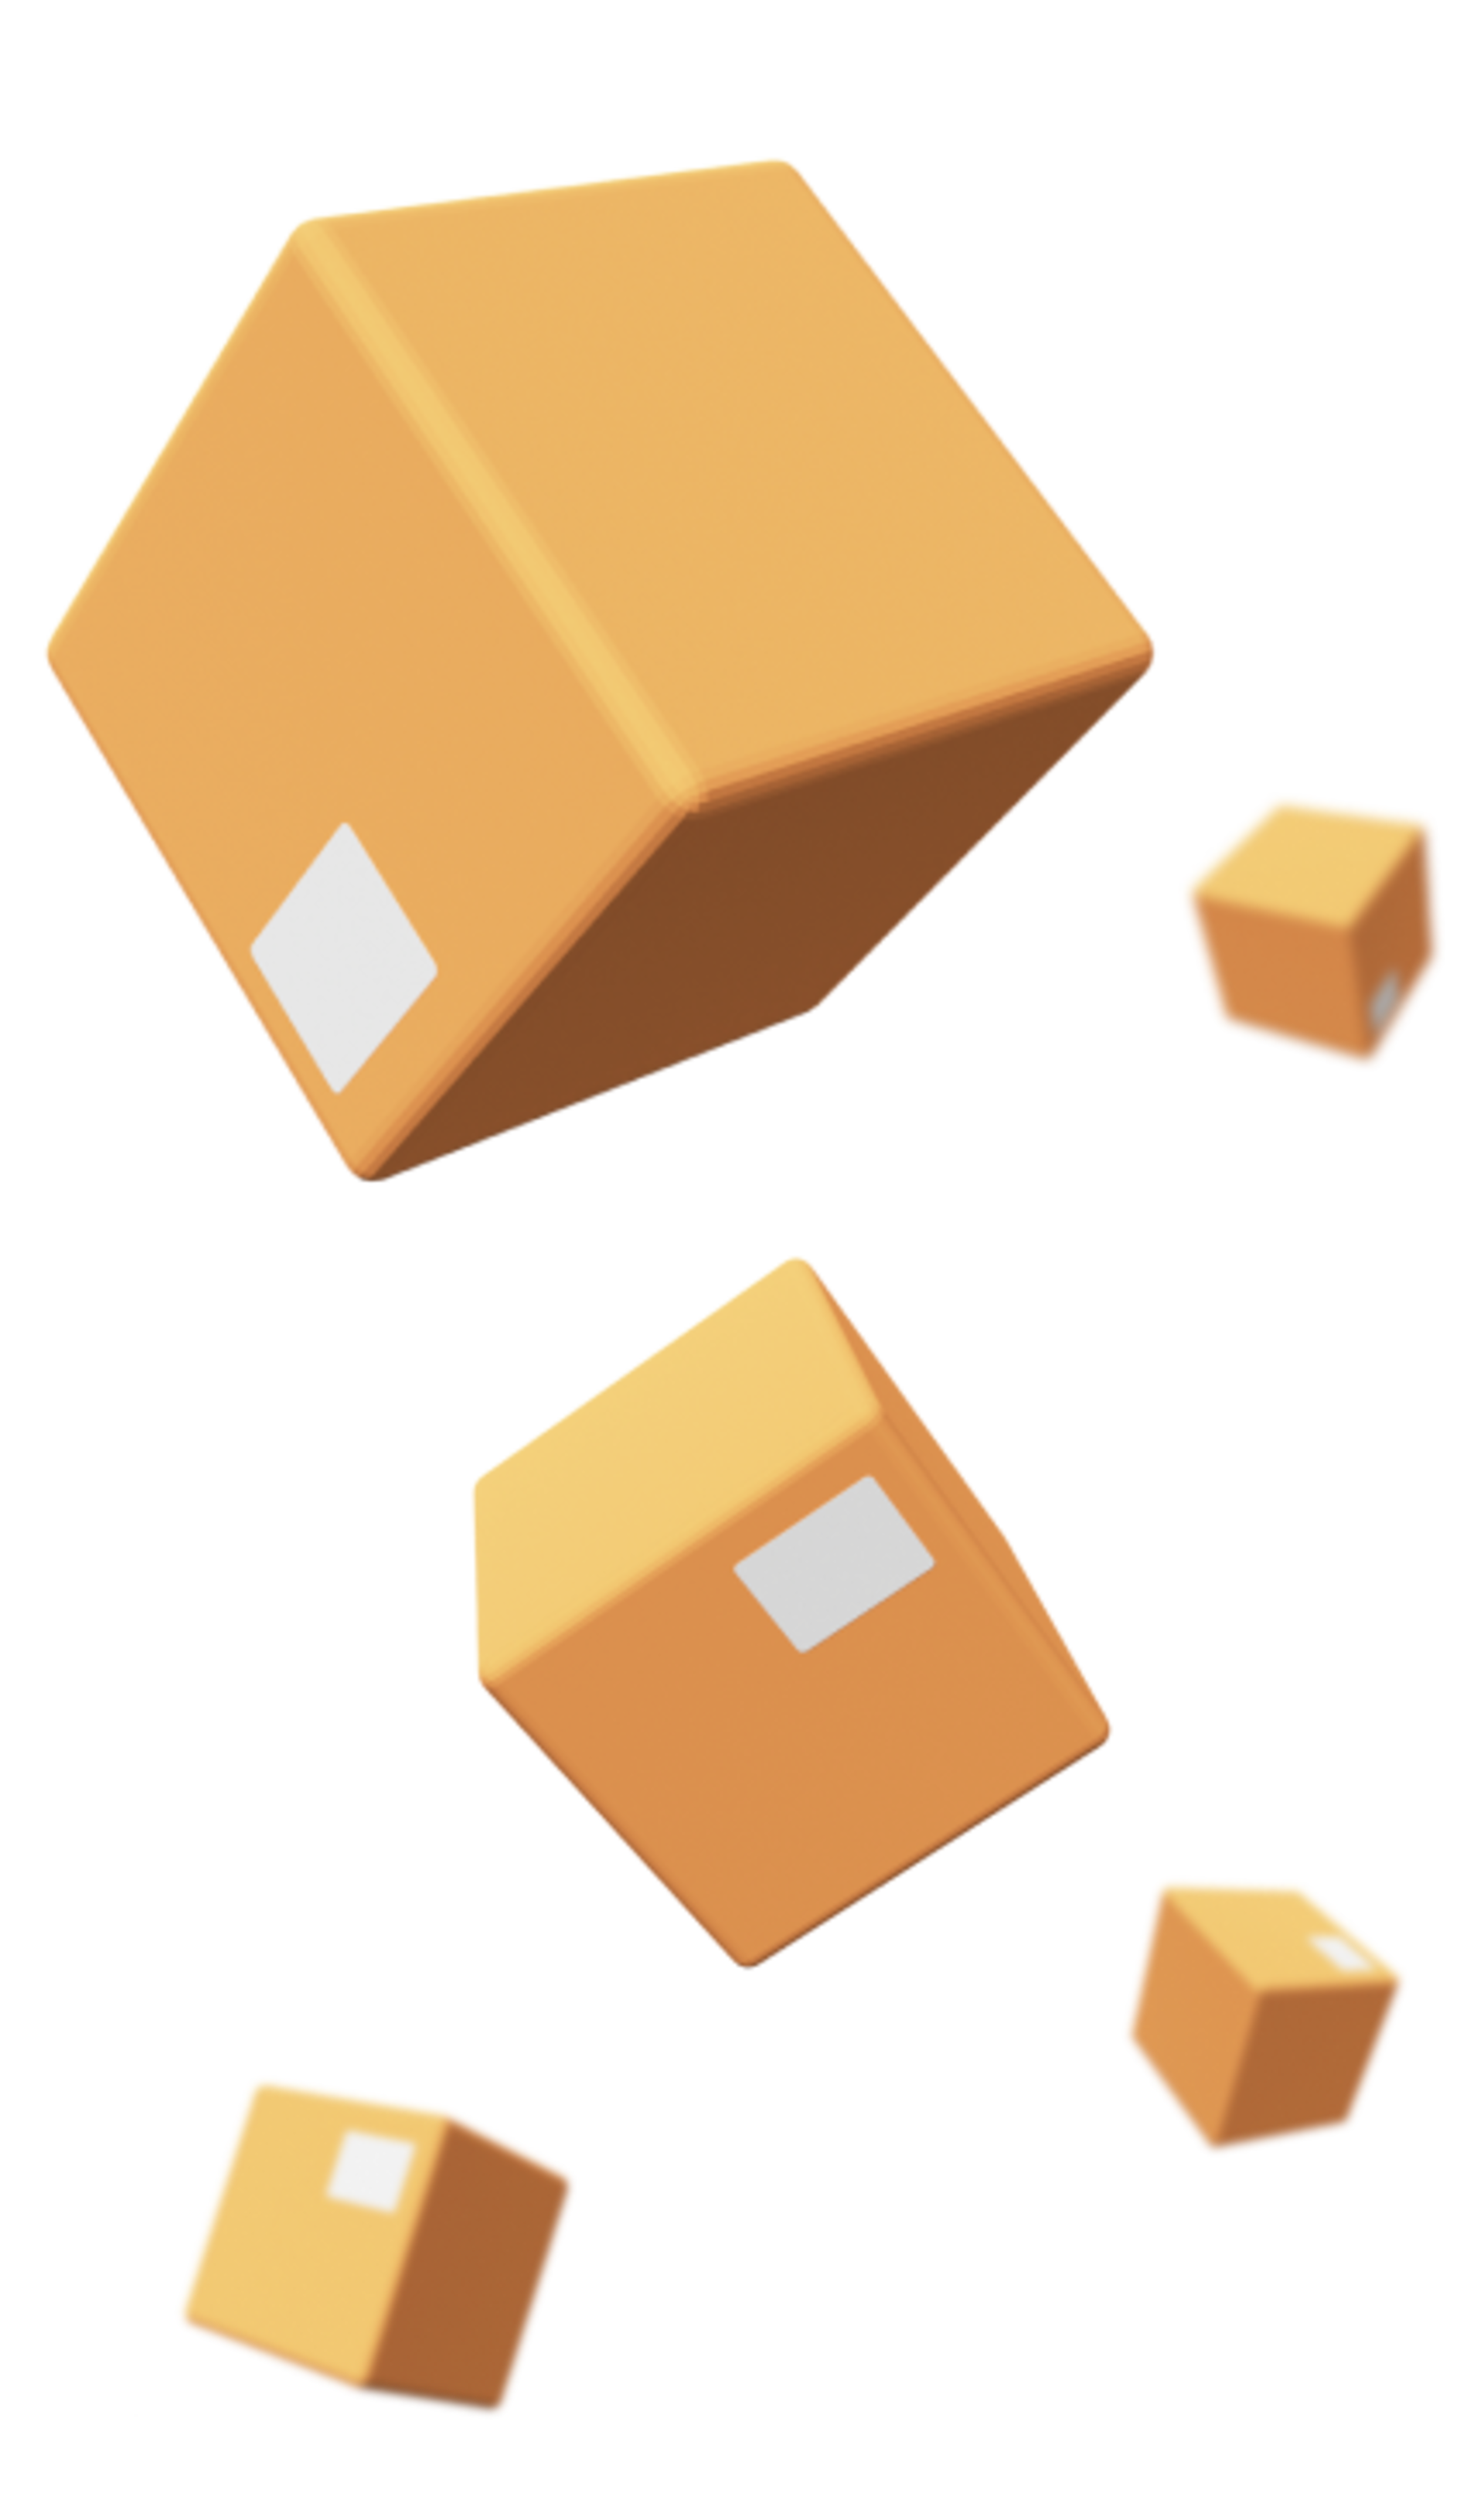 Large and small floating animated boxes